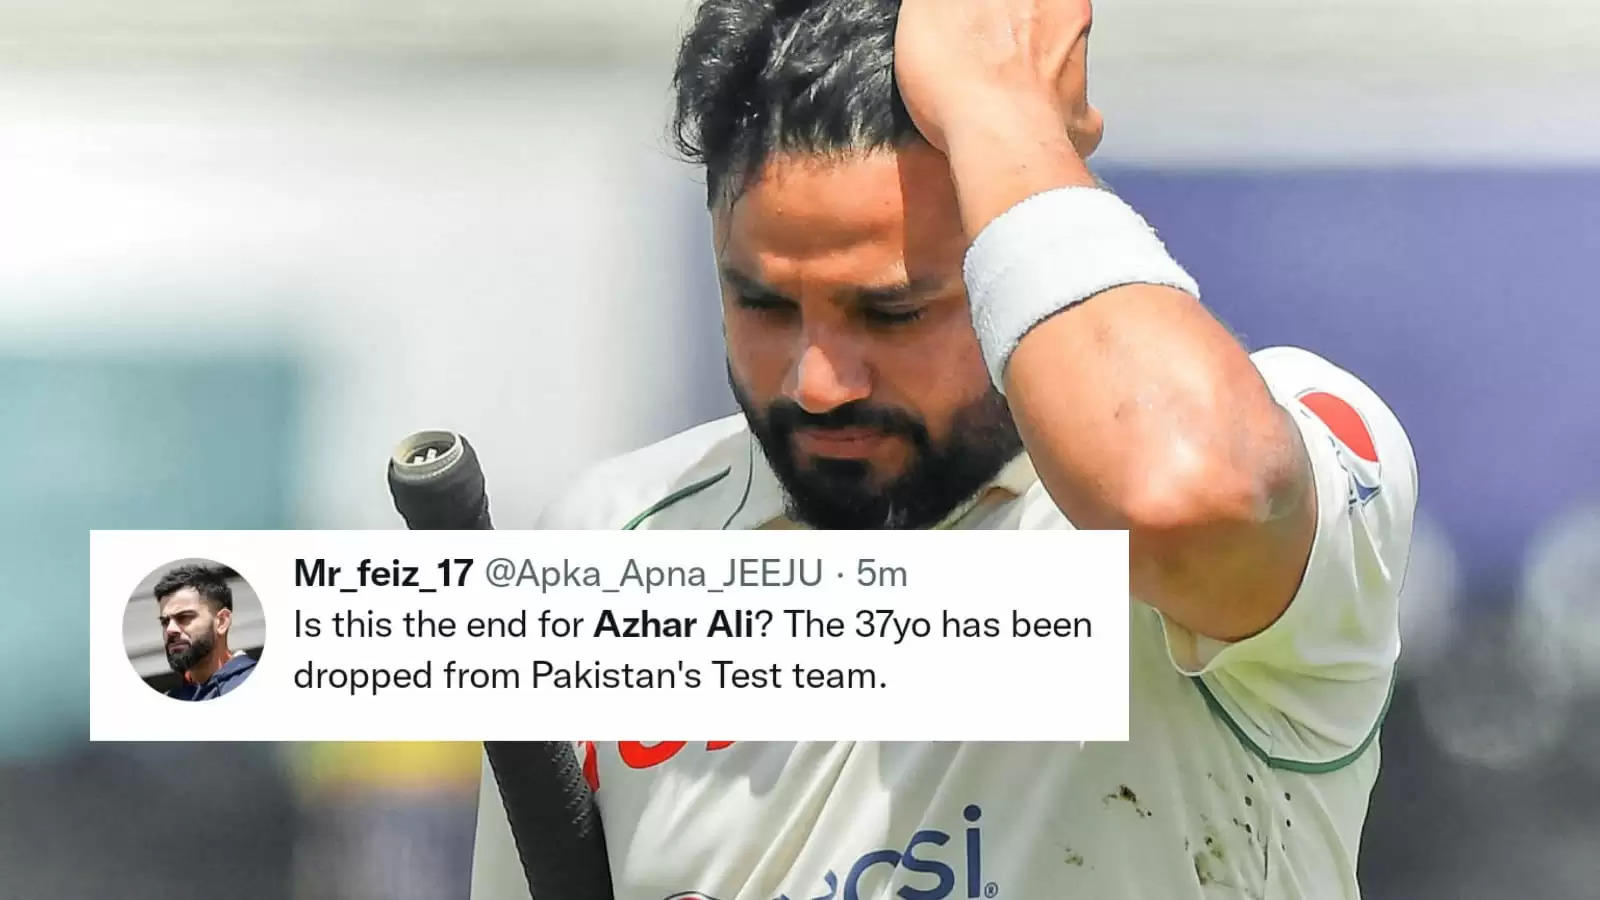 Is this the end of the road for Azhar Ali?